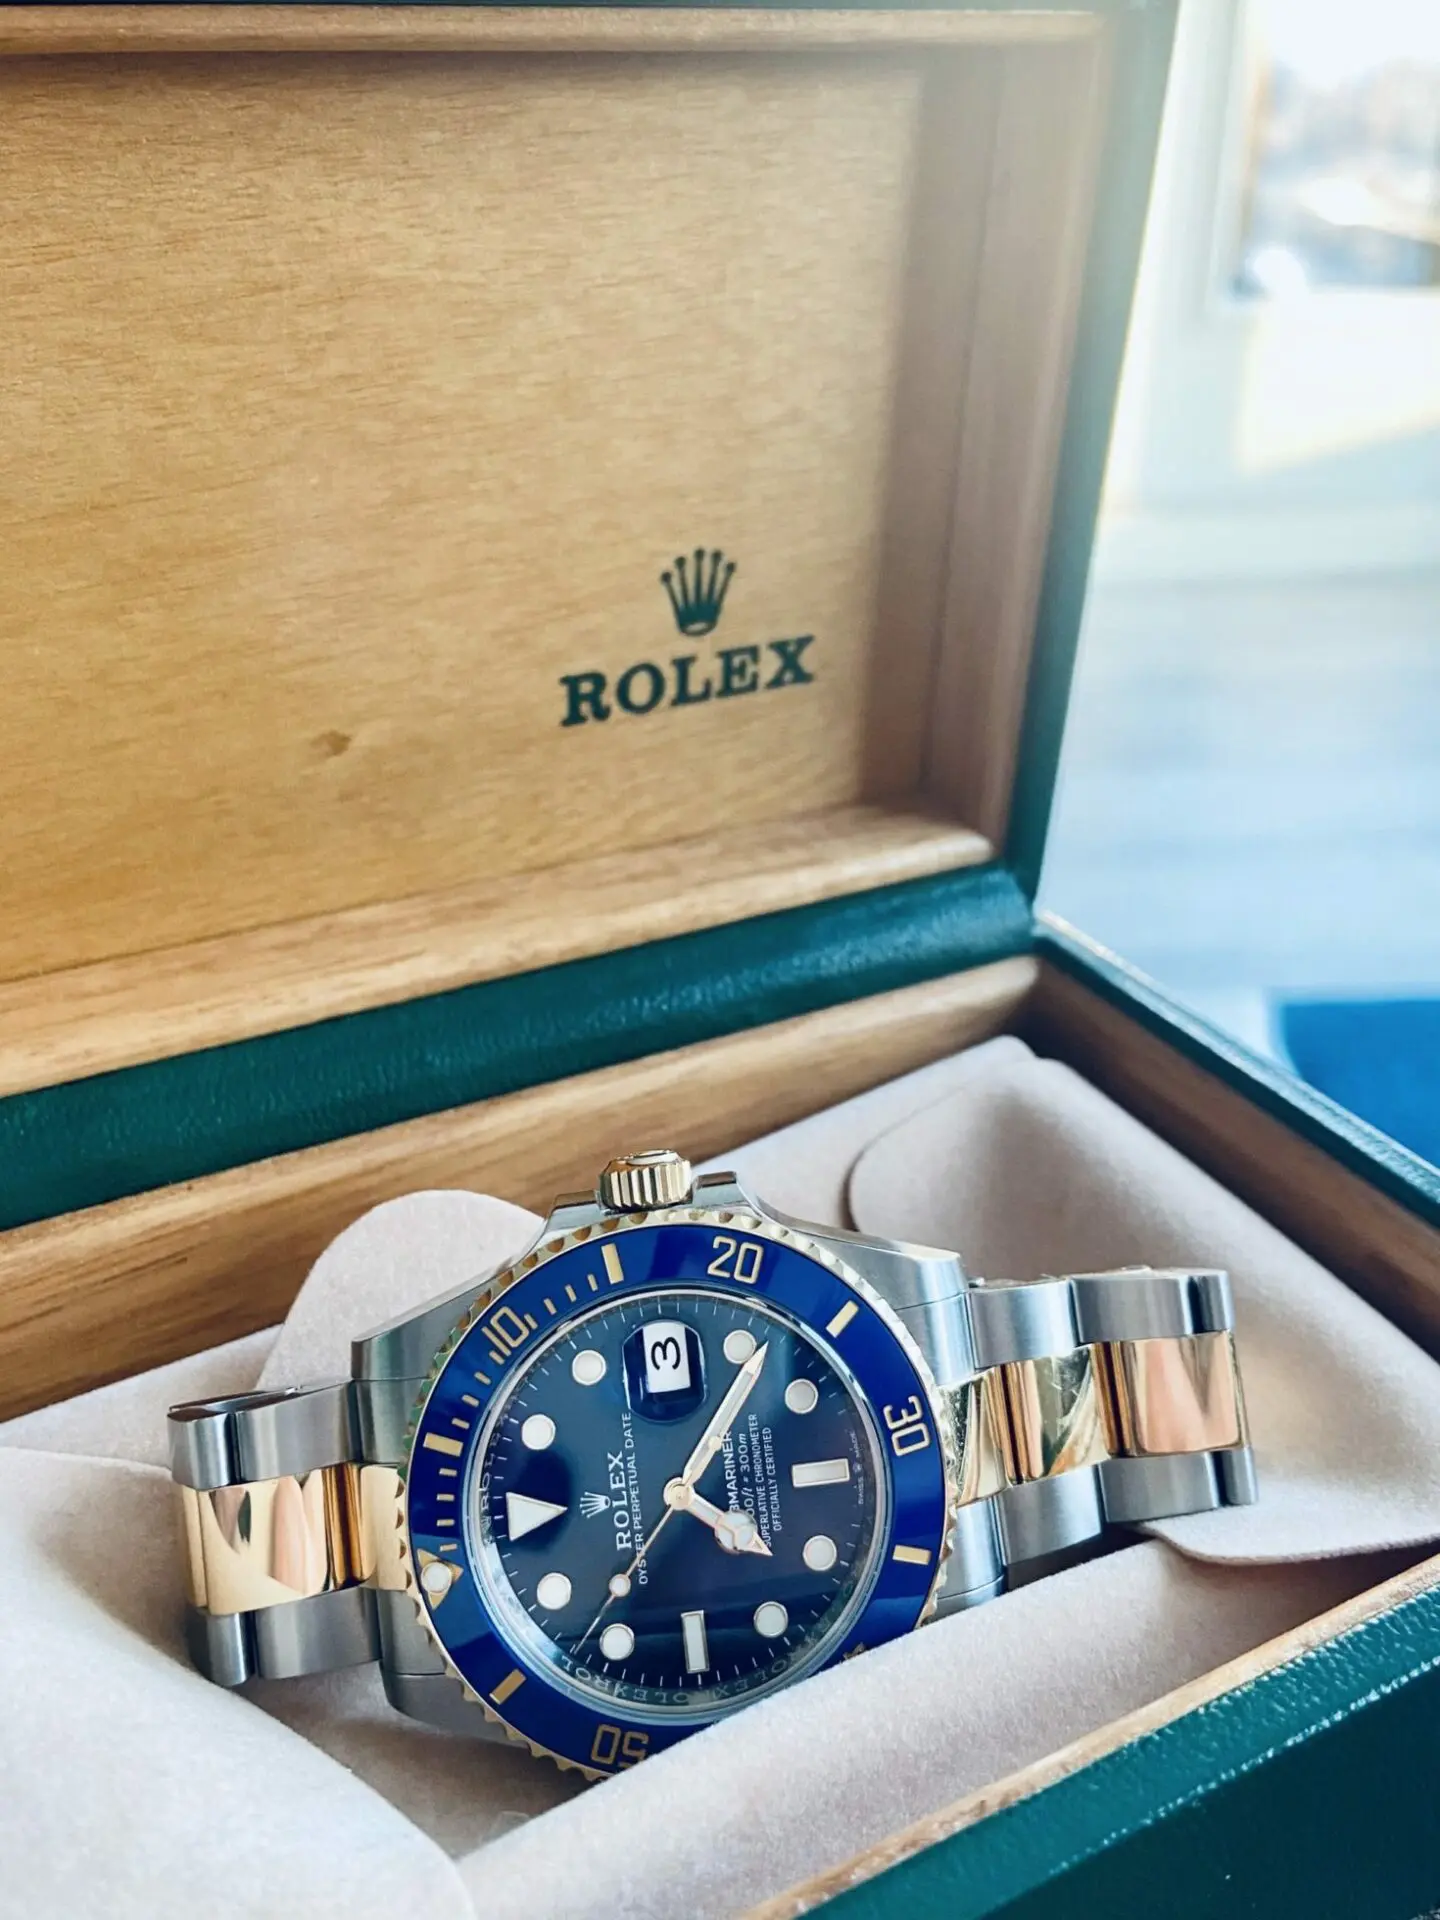 Rolex | Don't flash your wealth, like fancy Rolex watches, in London,  mugging threats are real, India's rich told - Telegraph India